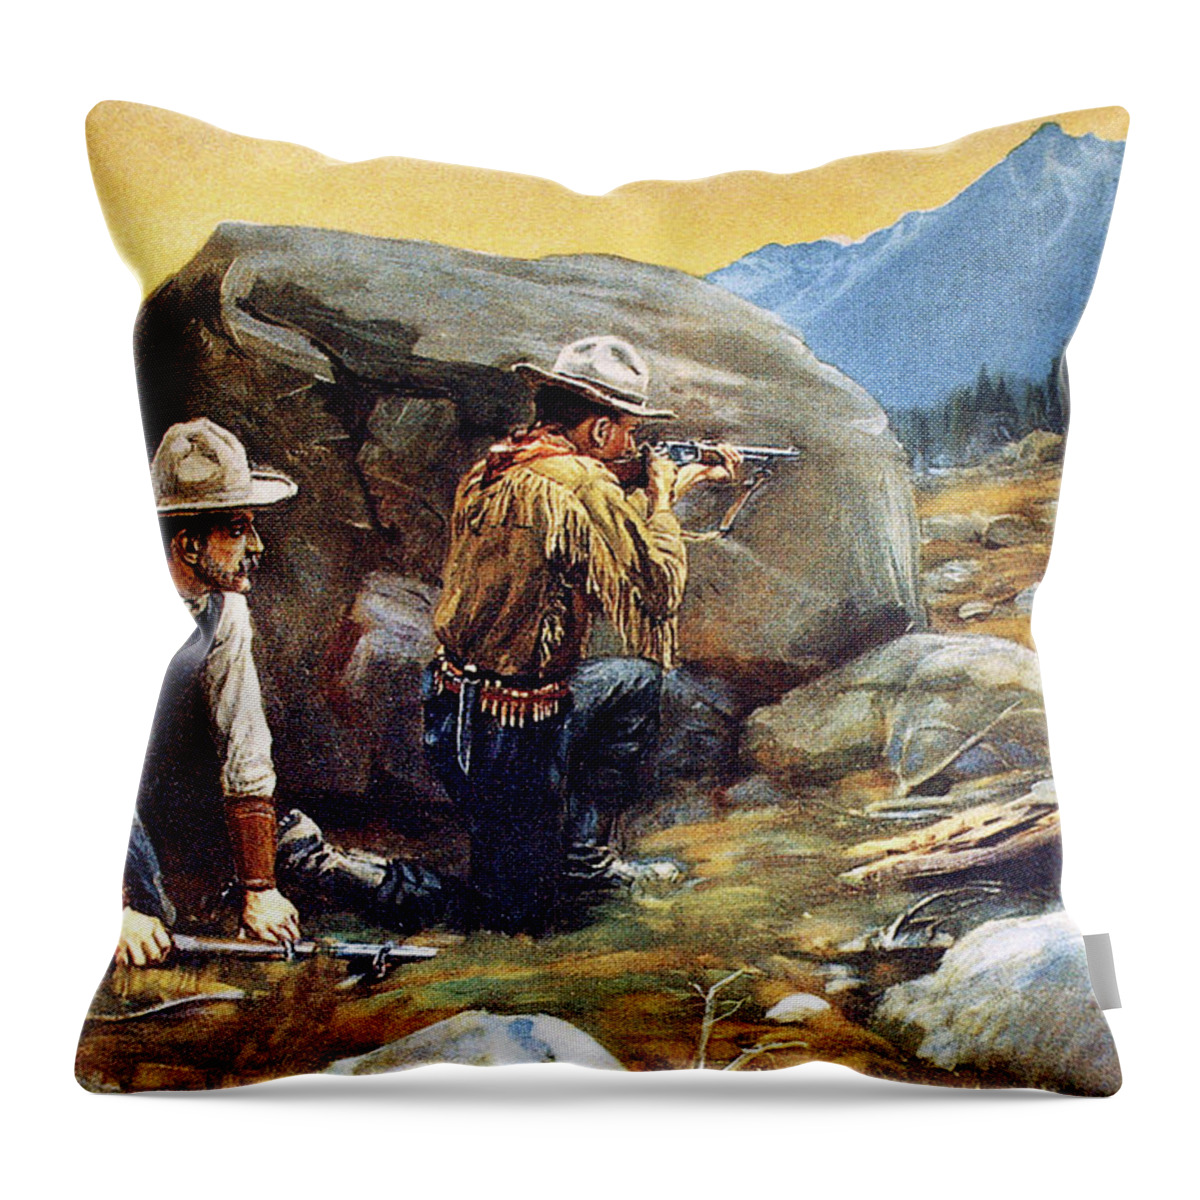 Outdoor Throw Pillow featuring the painting A Safe Shot by Philip R Goodwin